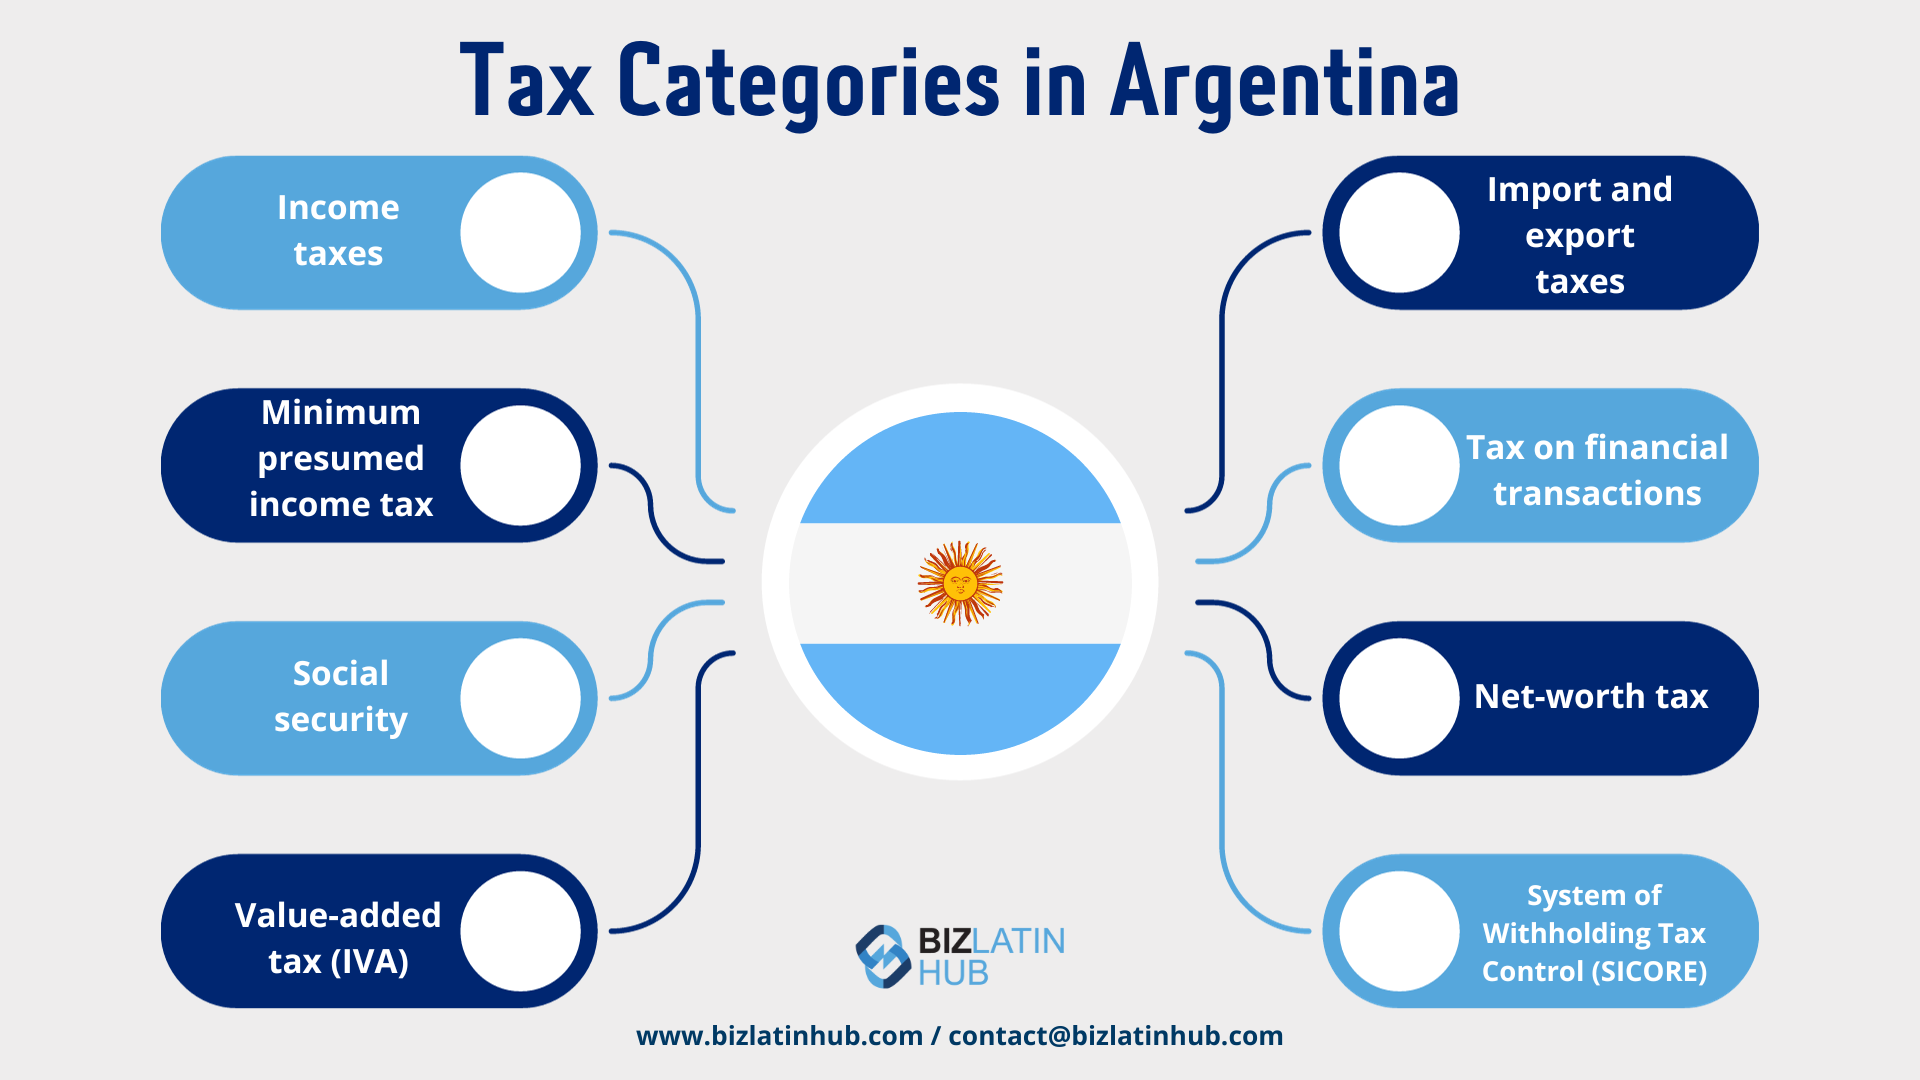 Accounting and Tax Requirements in Argentina – Tax Categories in Argentina